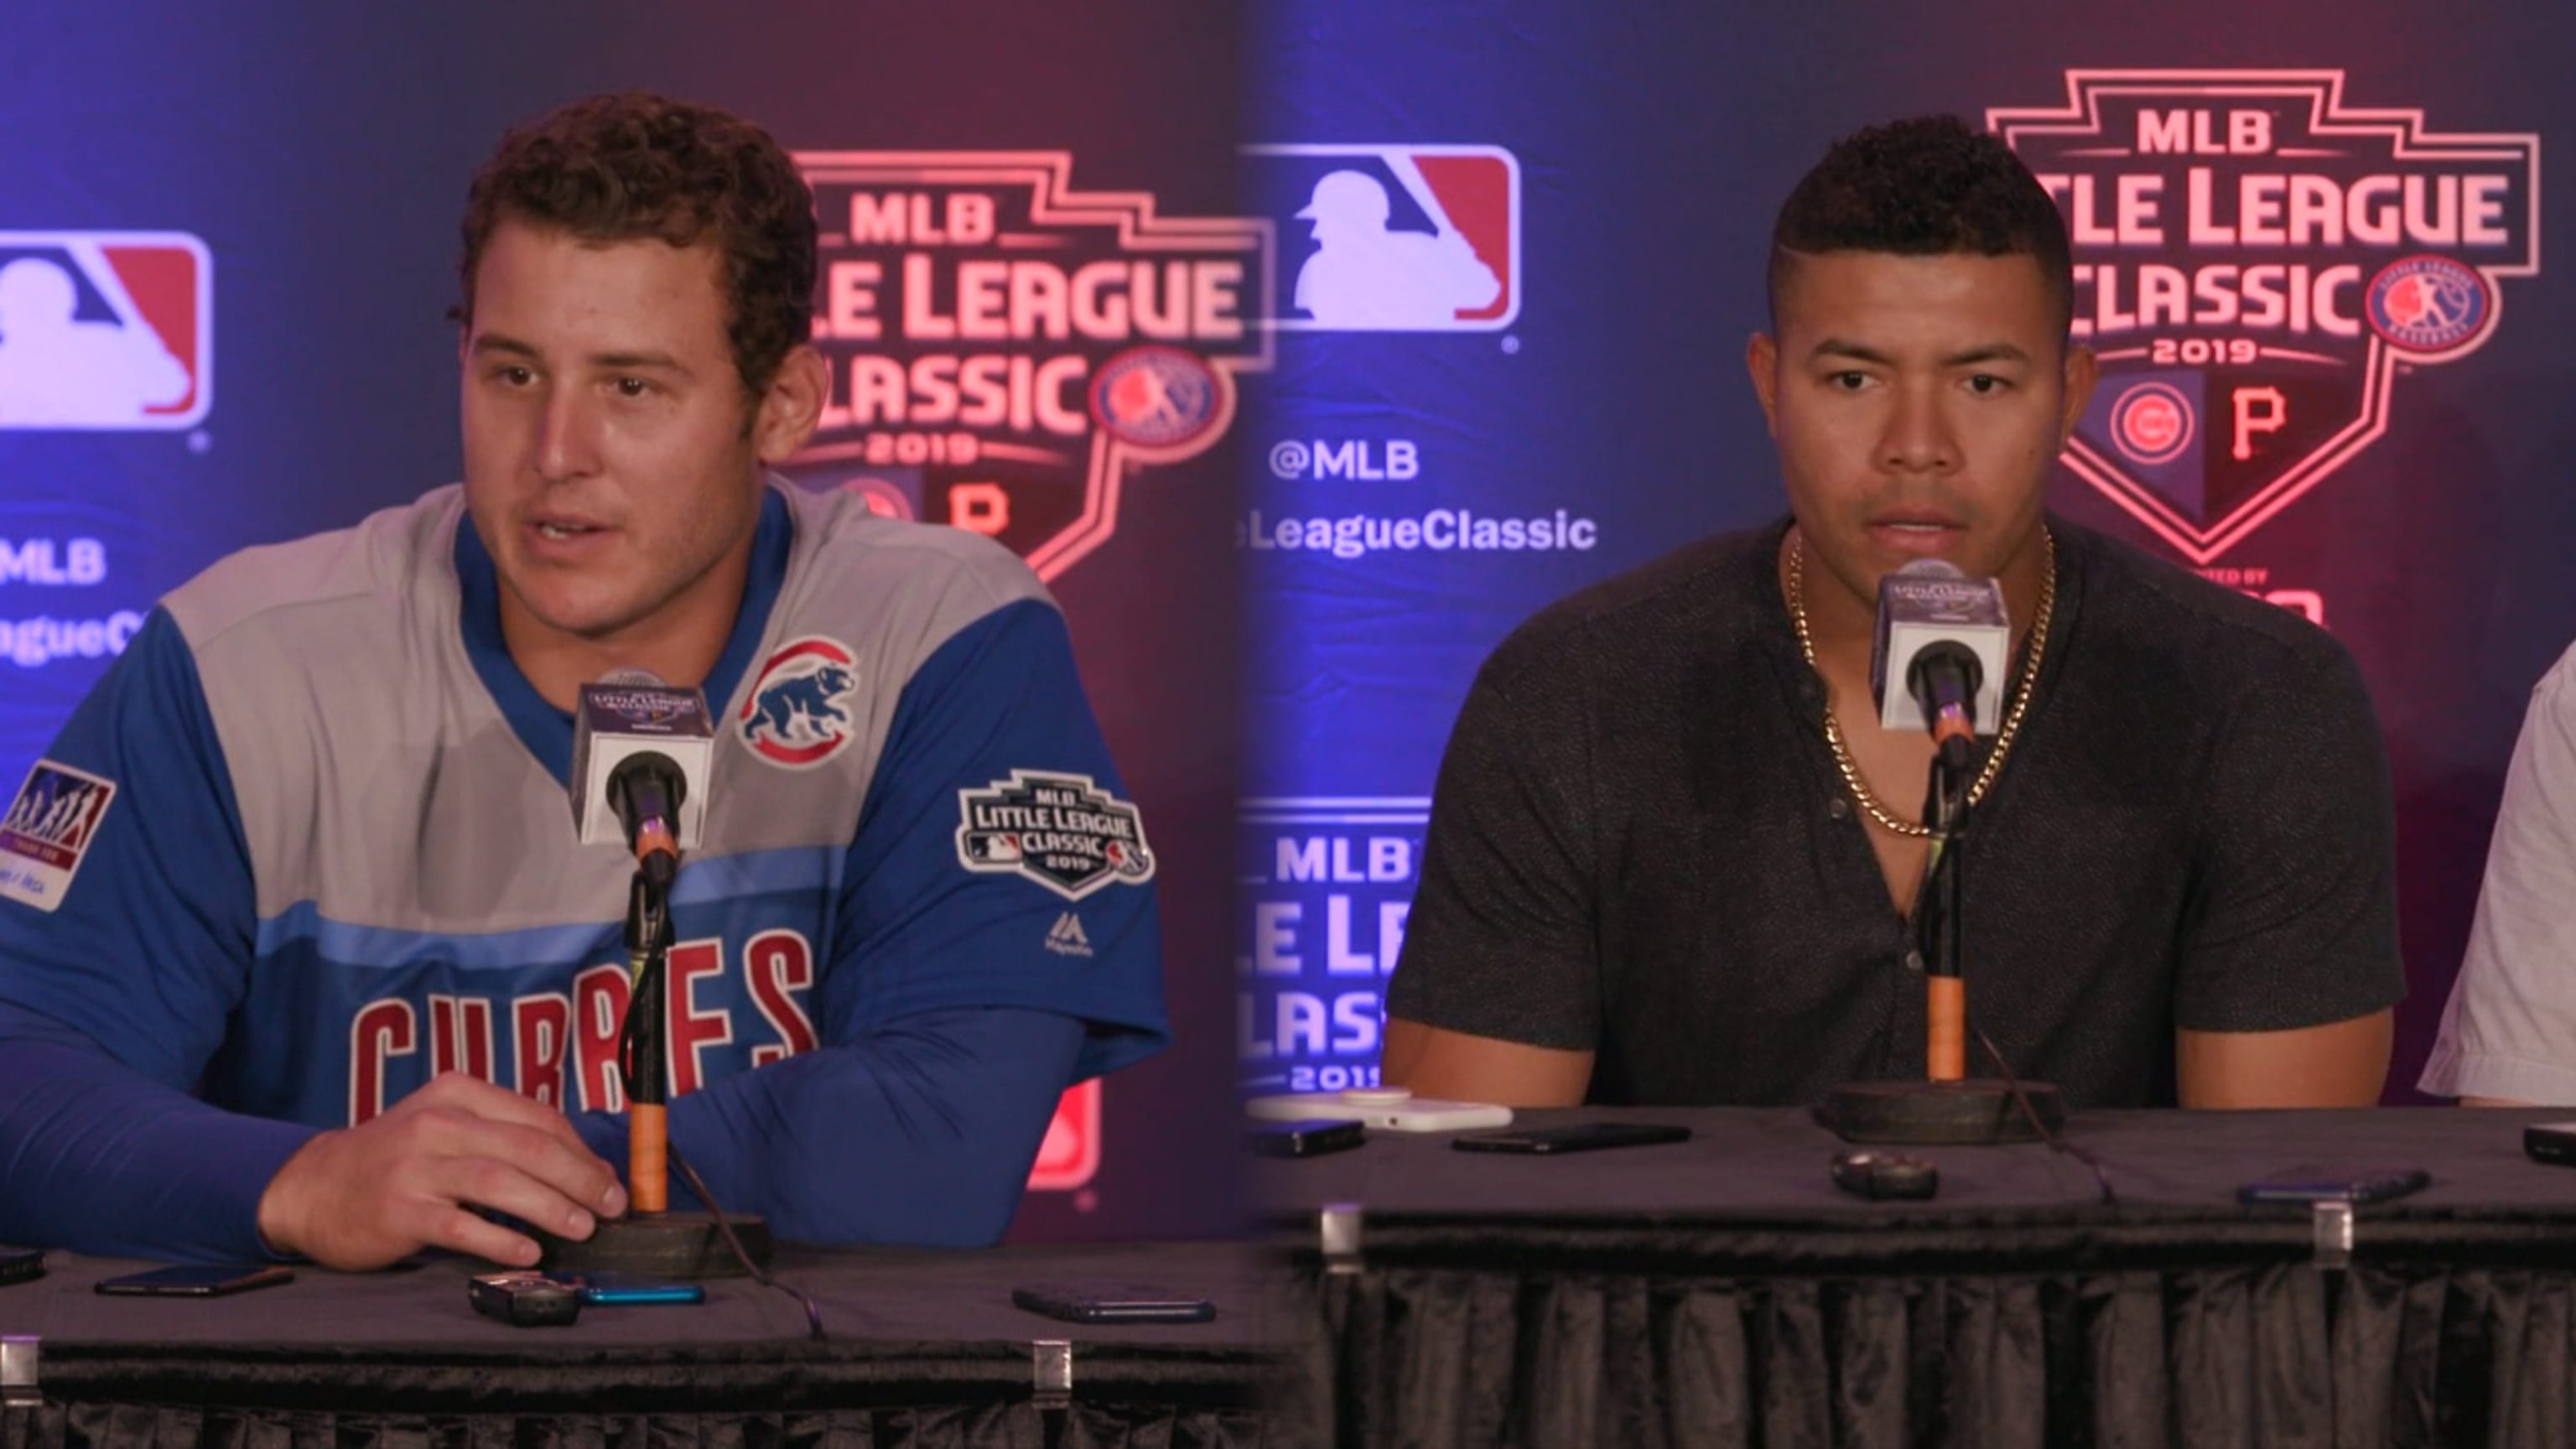 VIDEO: MLB Reveals Cubs and Pirates 'Little League Classic